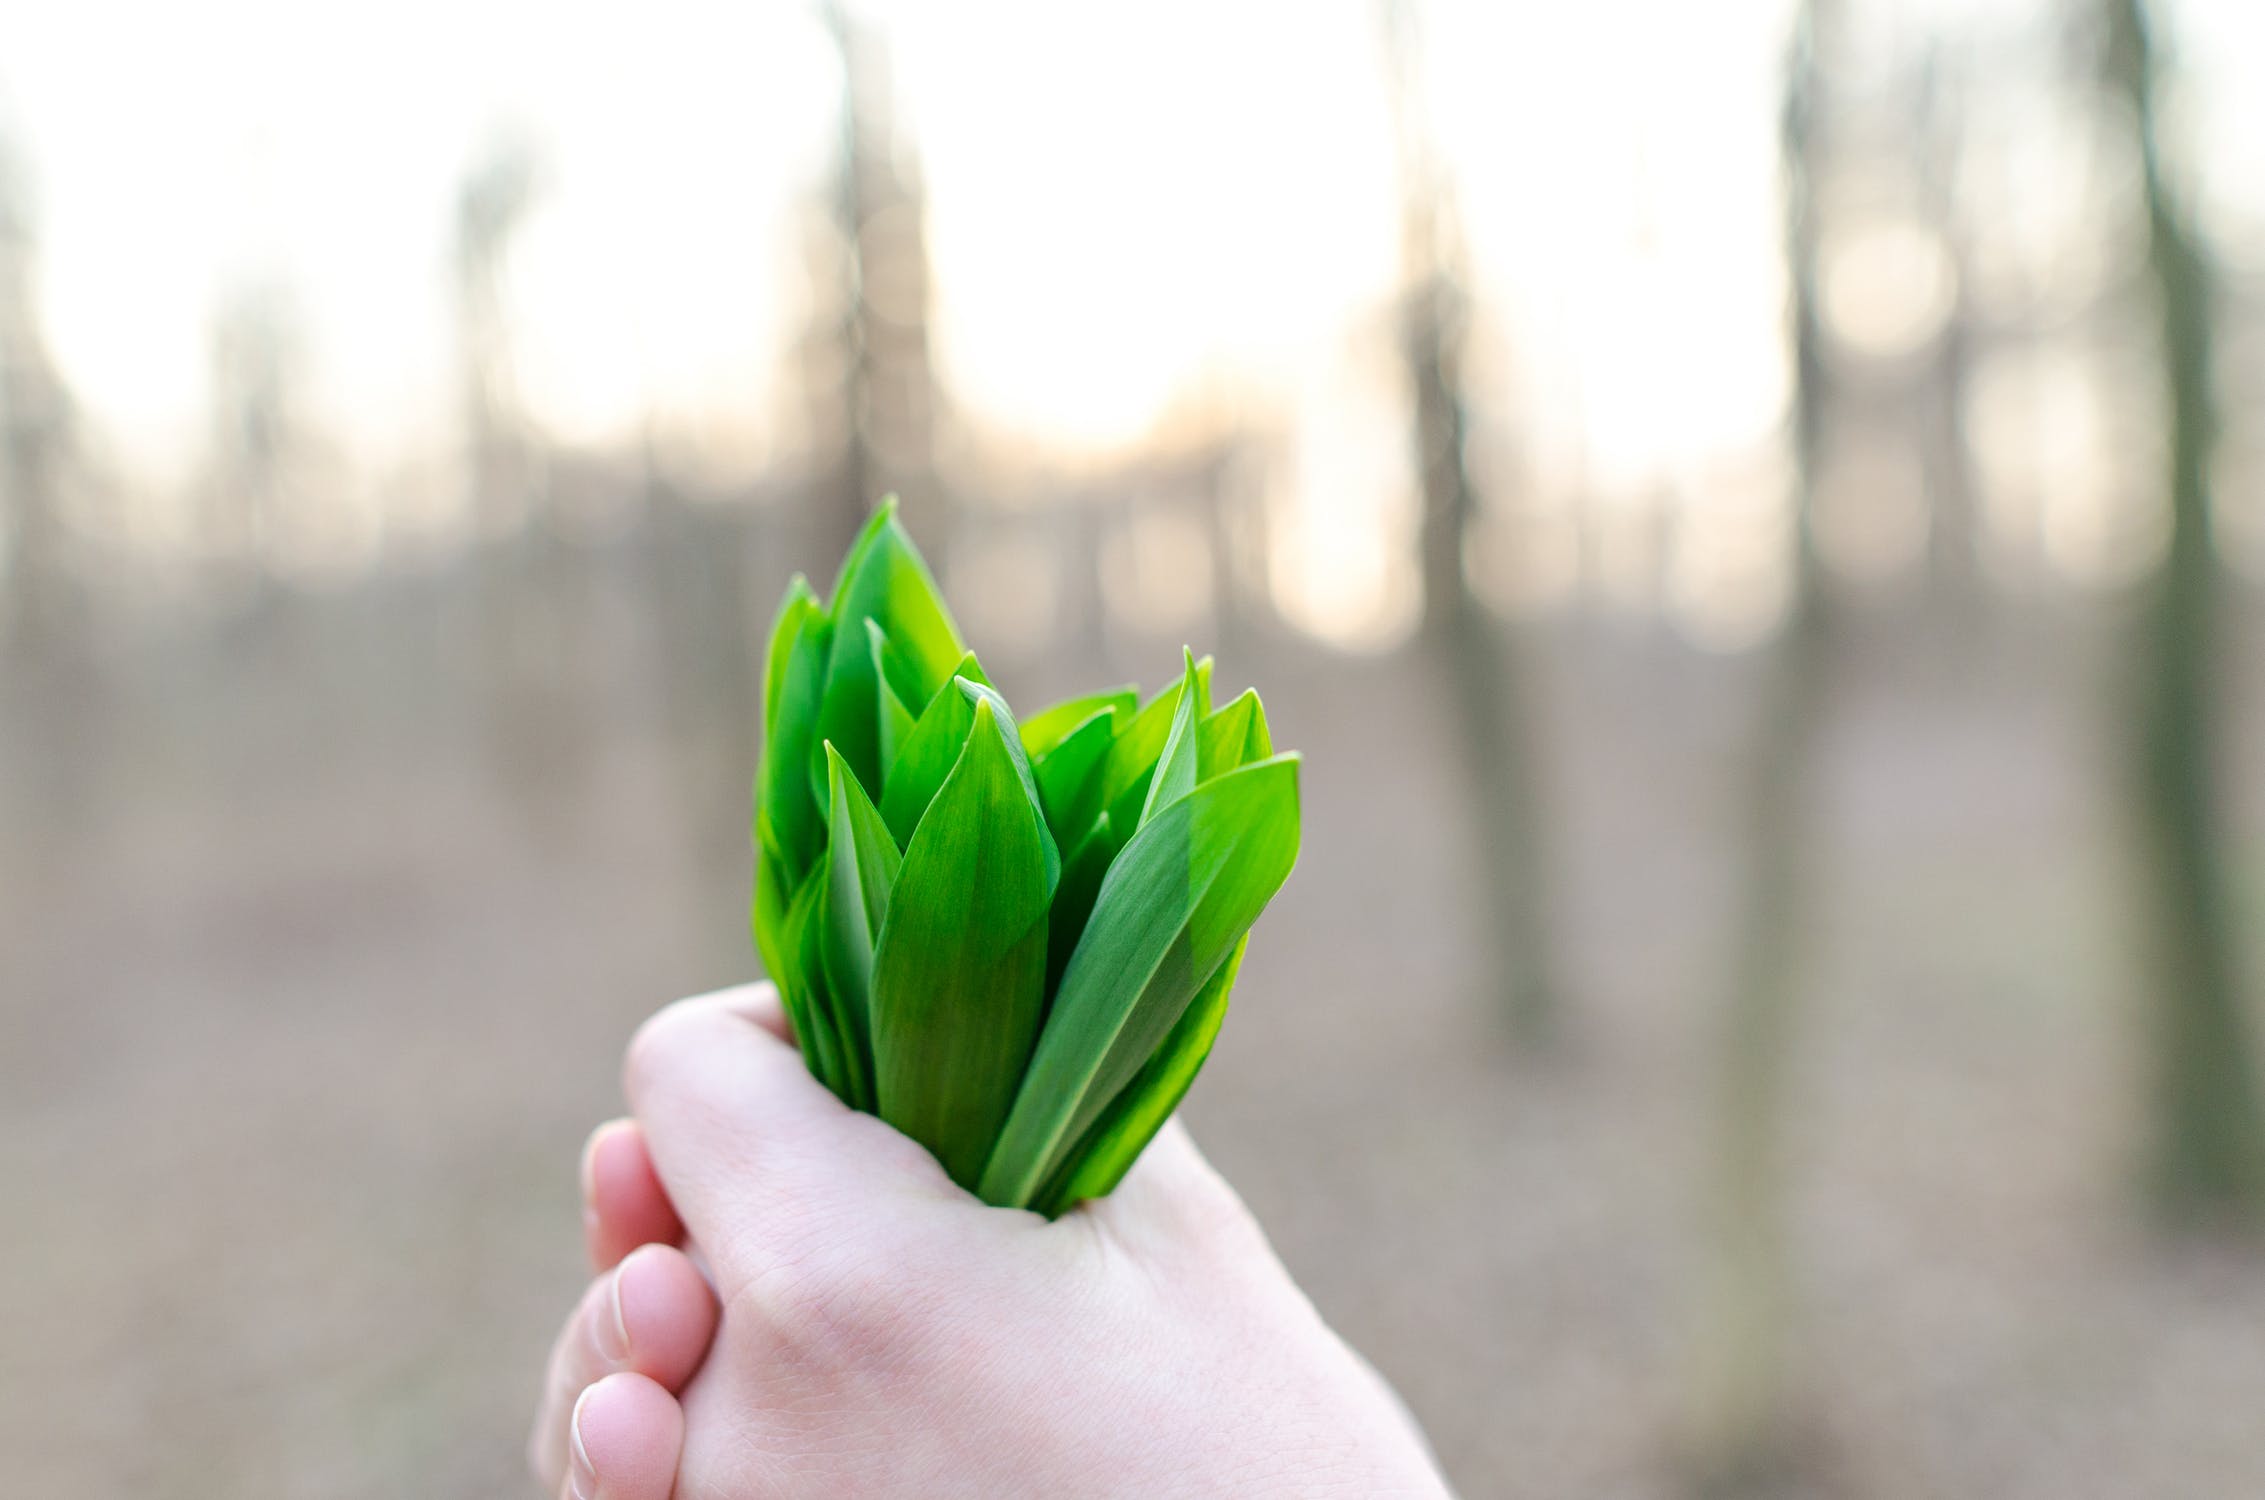 Wild garlic held in hand with forest in the background